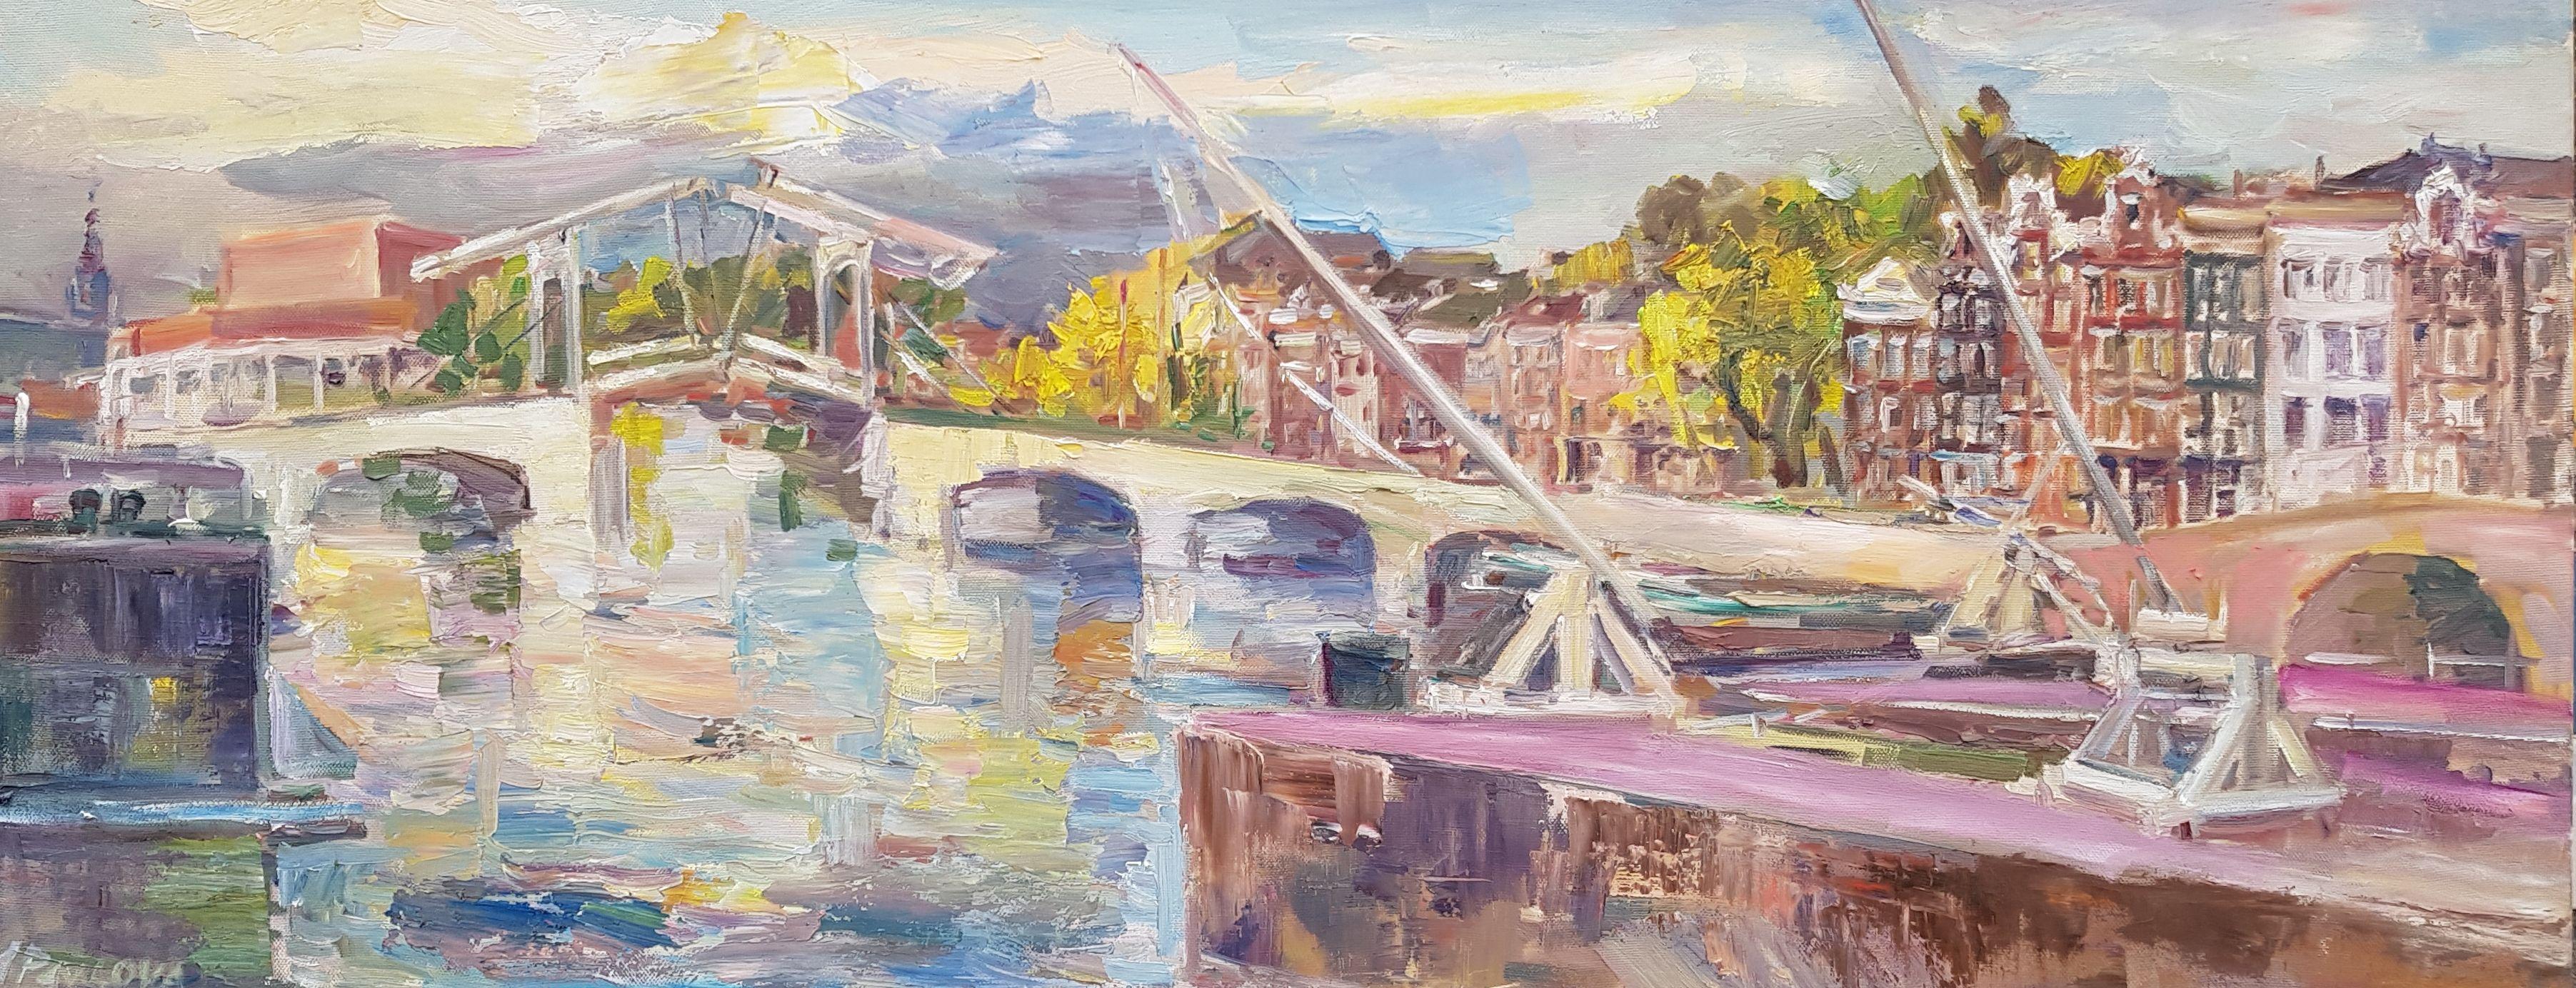 That is part of large canal of AmsterdM, Amstel, with white brigde, what namen Skinny bridge, behind you can see part of Nationale opera and ballet, in front system of sluse, , was nice light  and good reflection of the sky. :: Painting ::